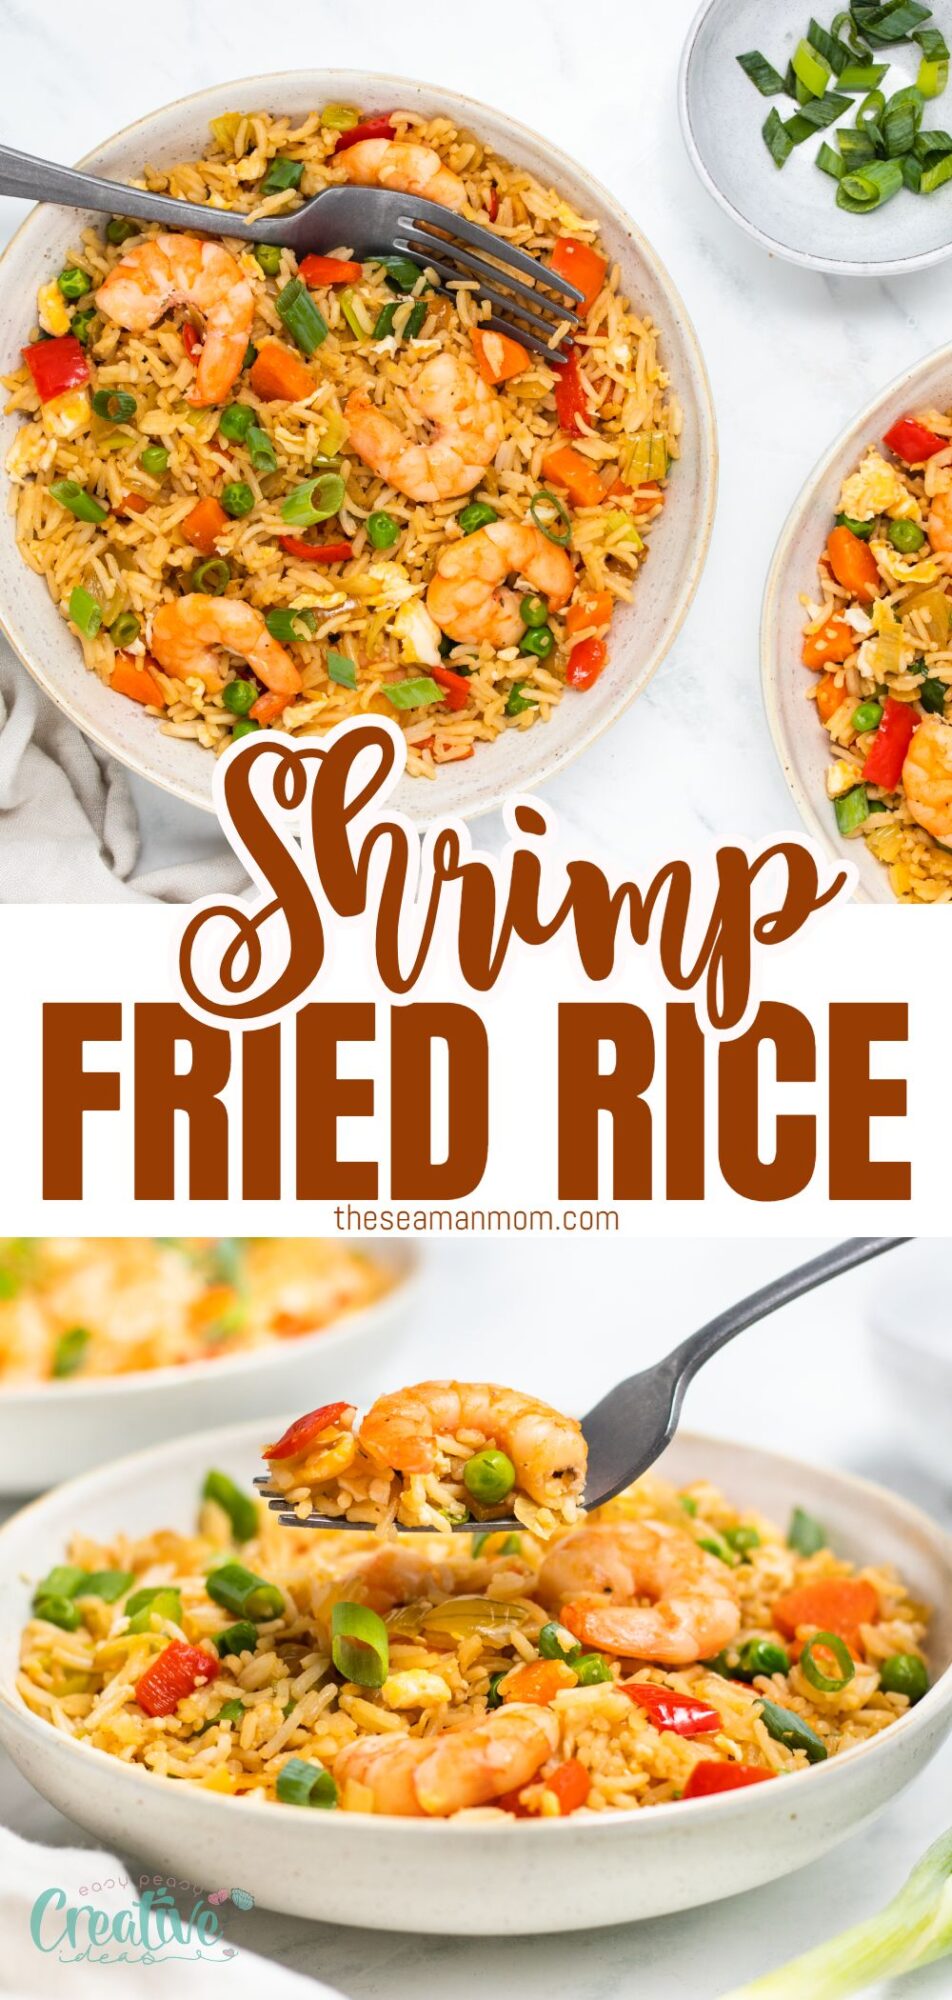 Indulge in the ultimate easy shrimp fried rice - a quick and delicious dish bursting with savory shrimps and fresh veggies!